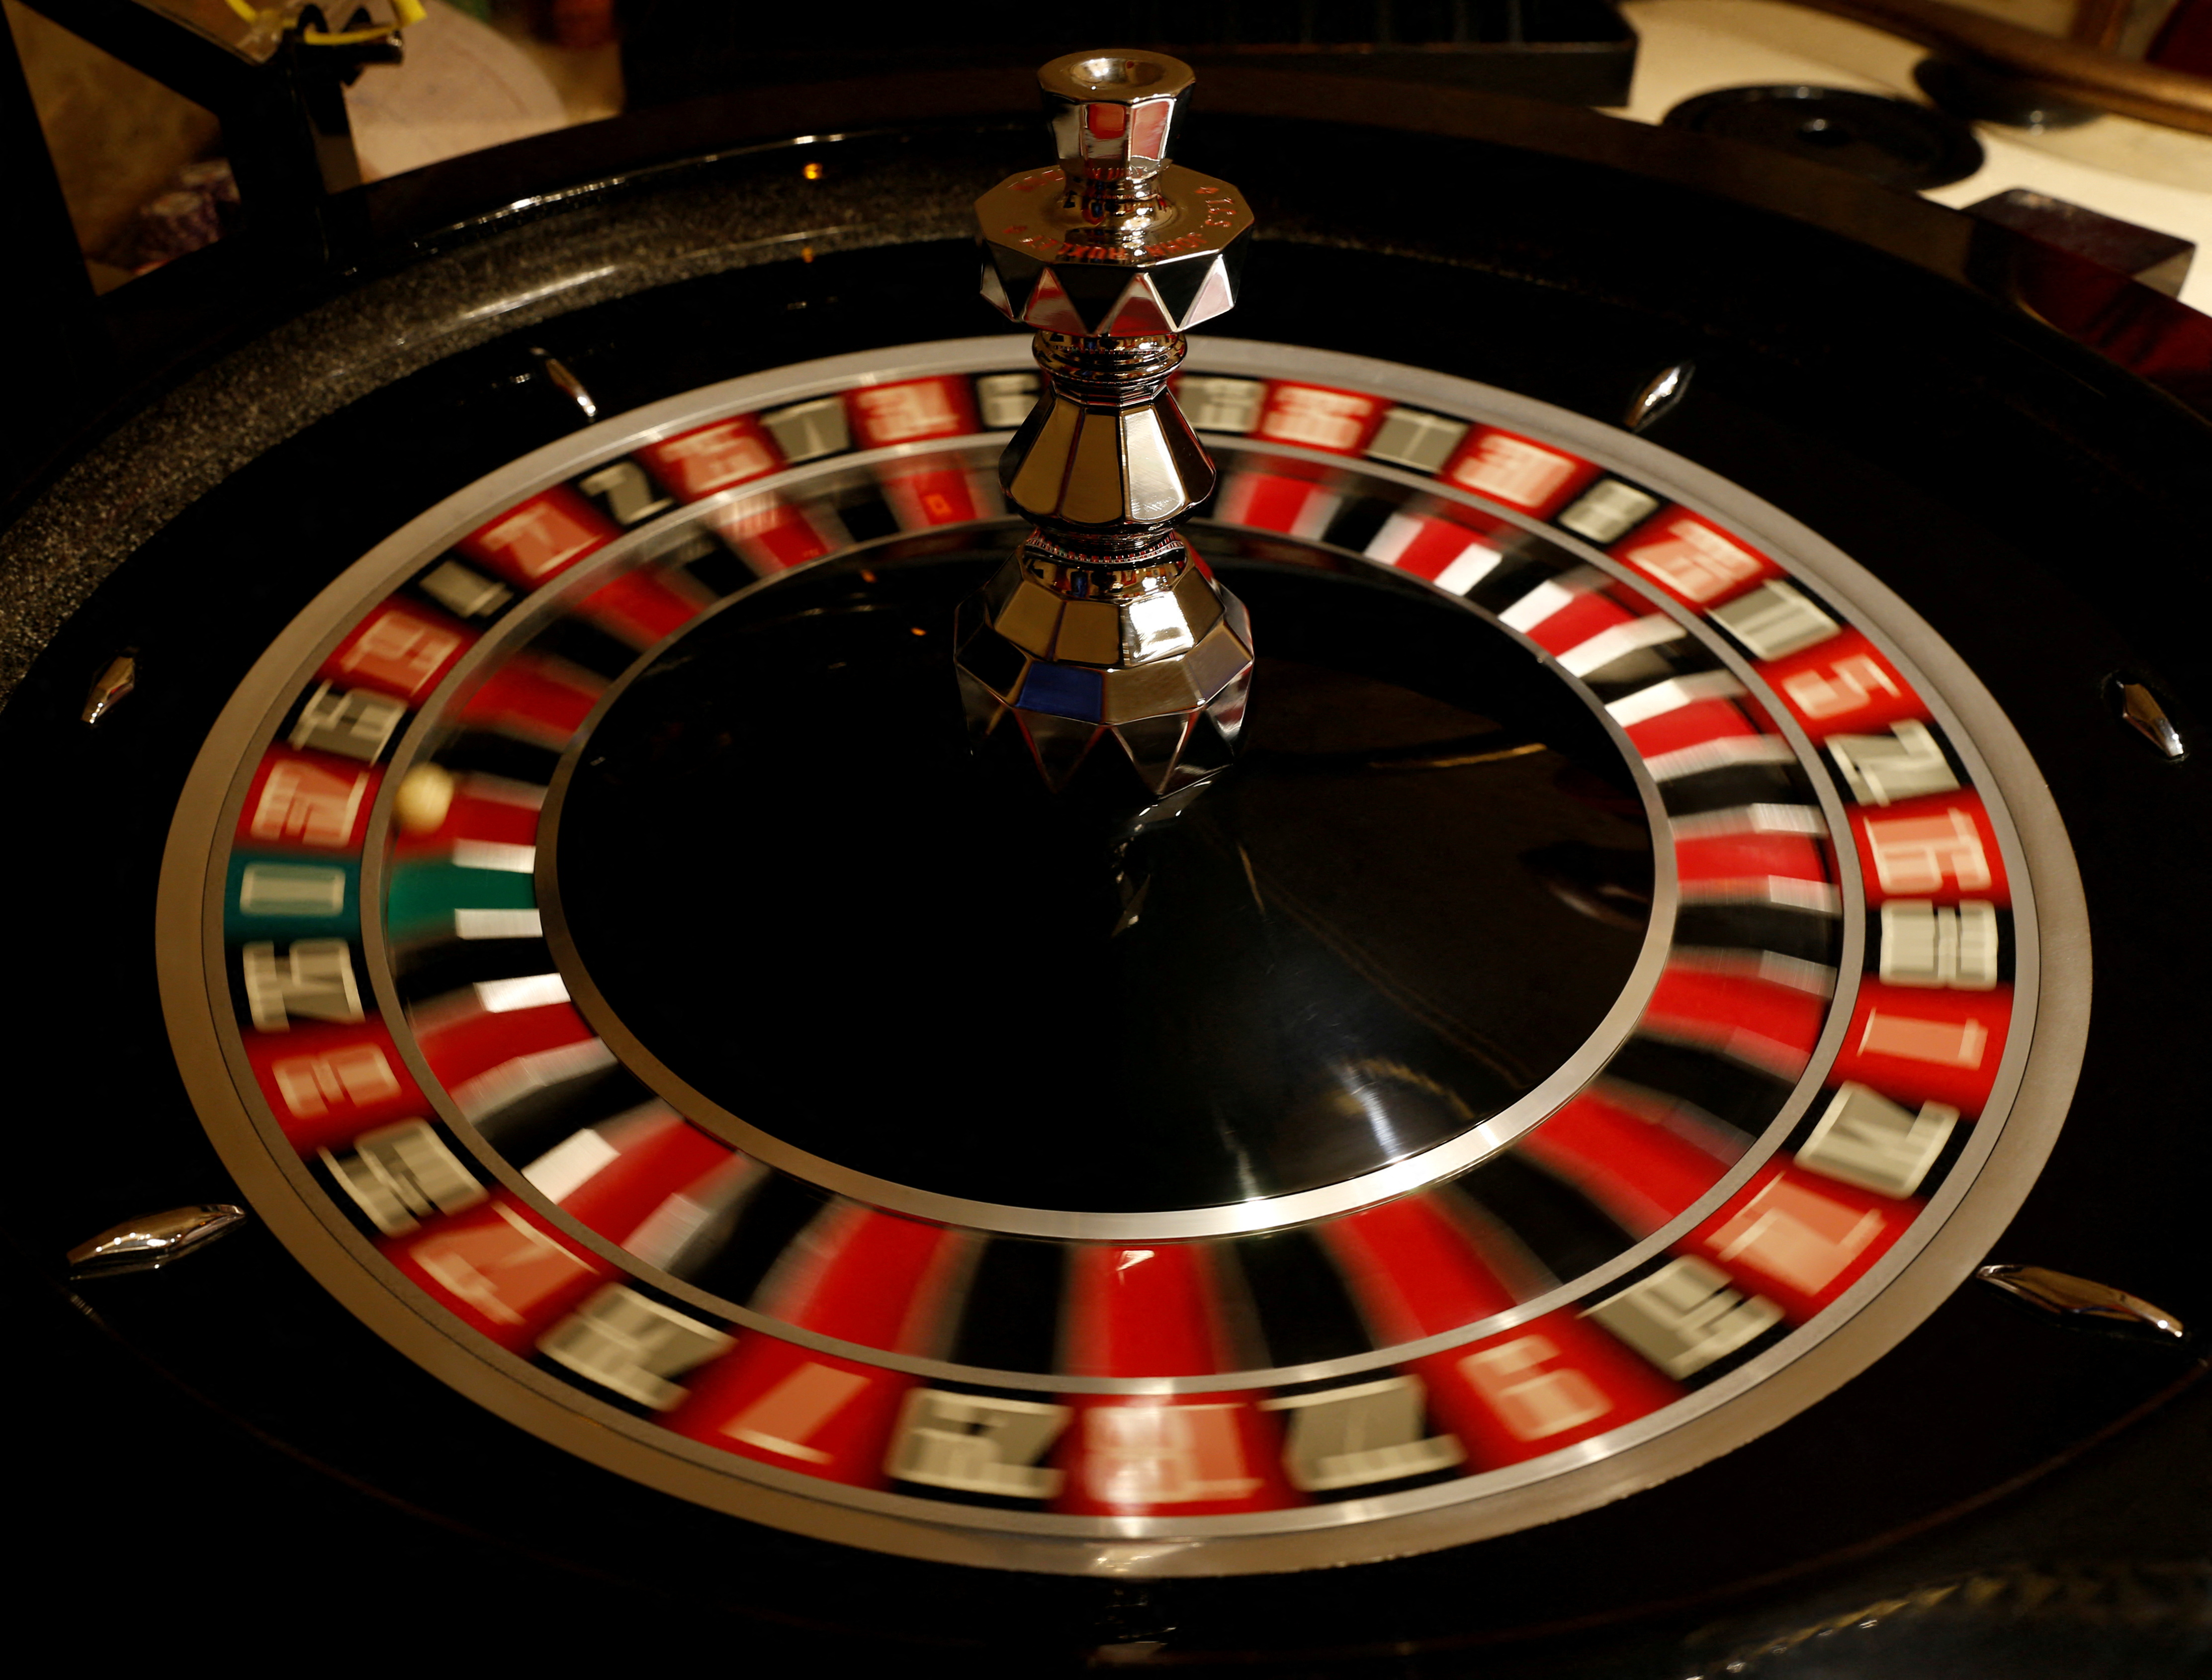 The spinning wheel on a Roulette table is seen at the Dragonara Casino in St Julian's